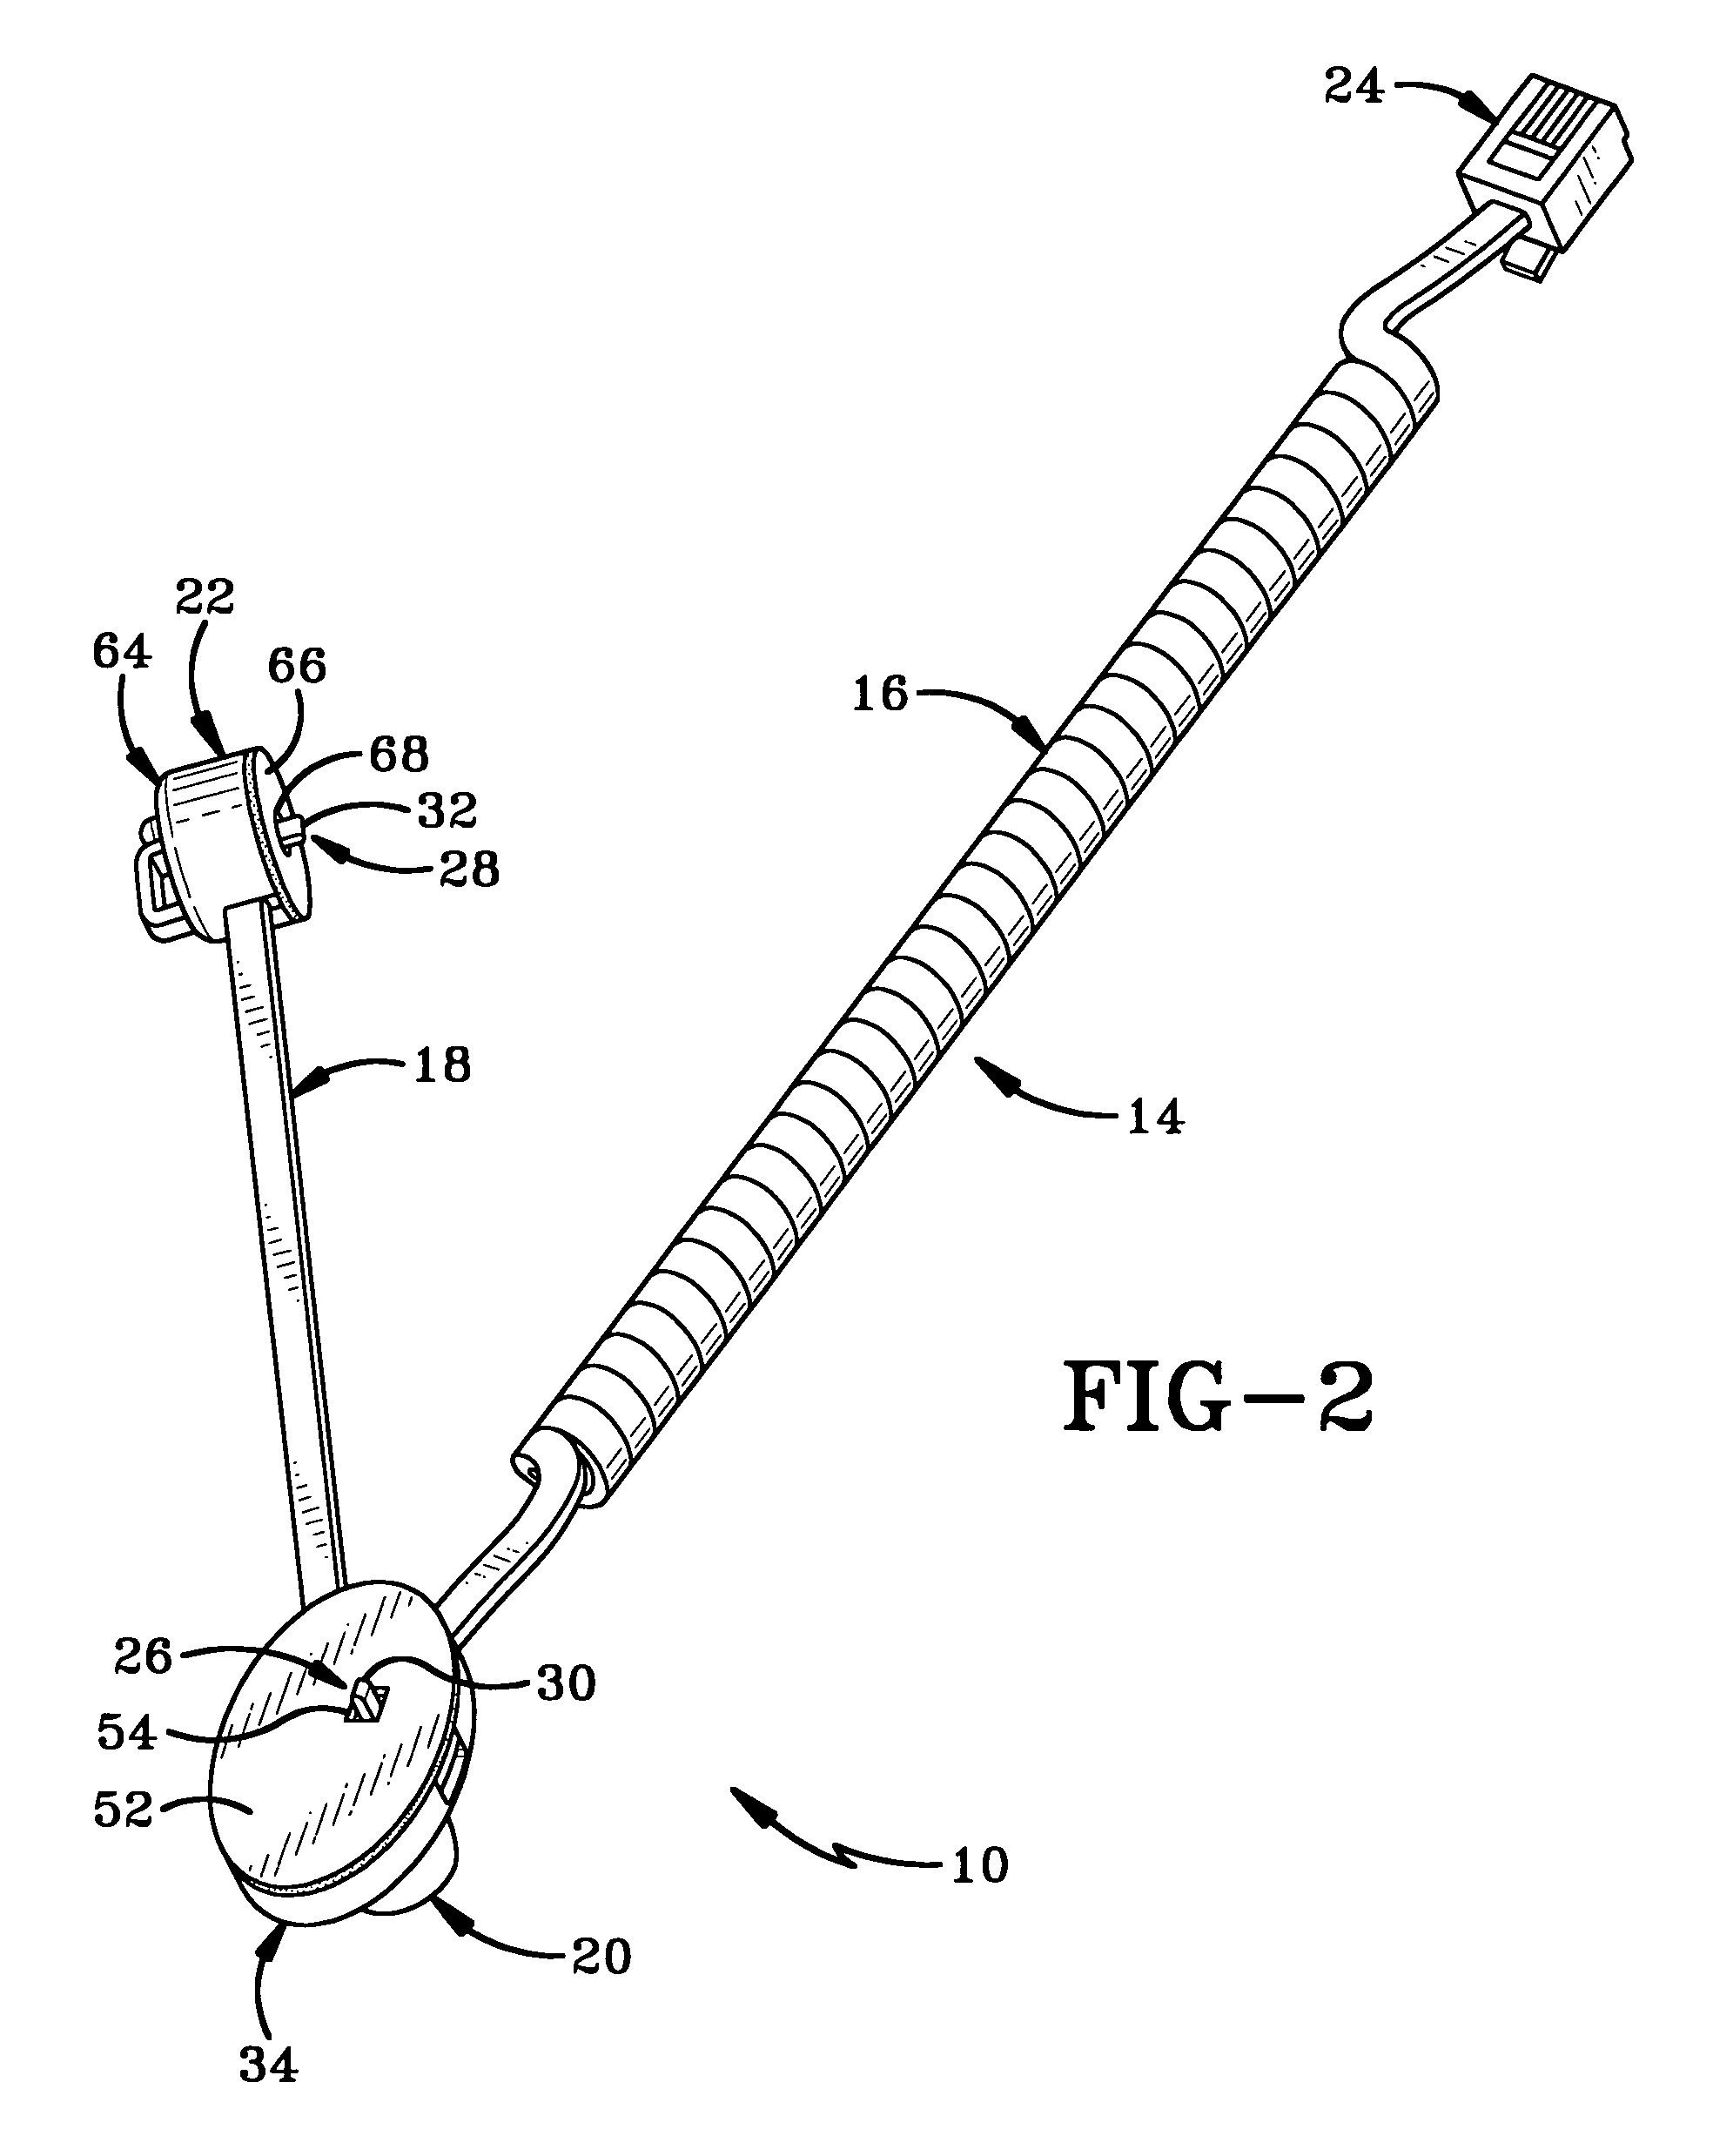 Theft deterrent device with dual sensor assembly